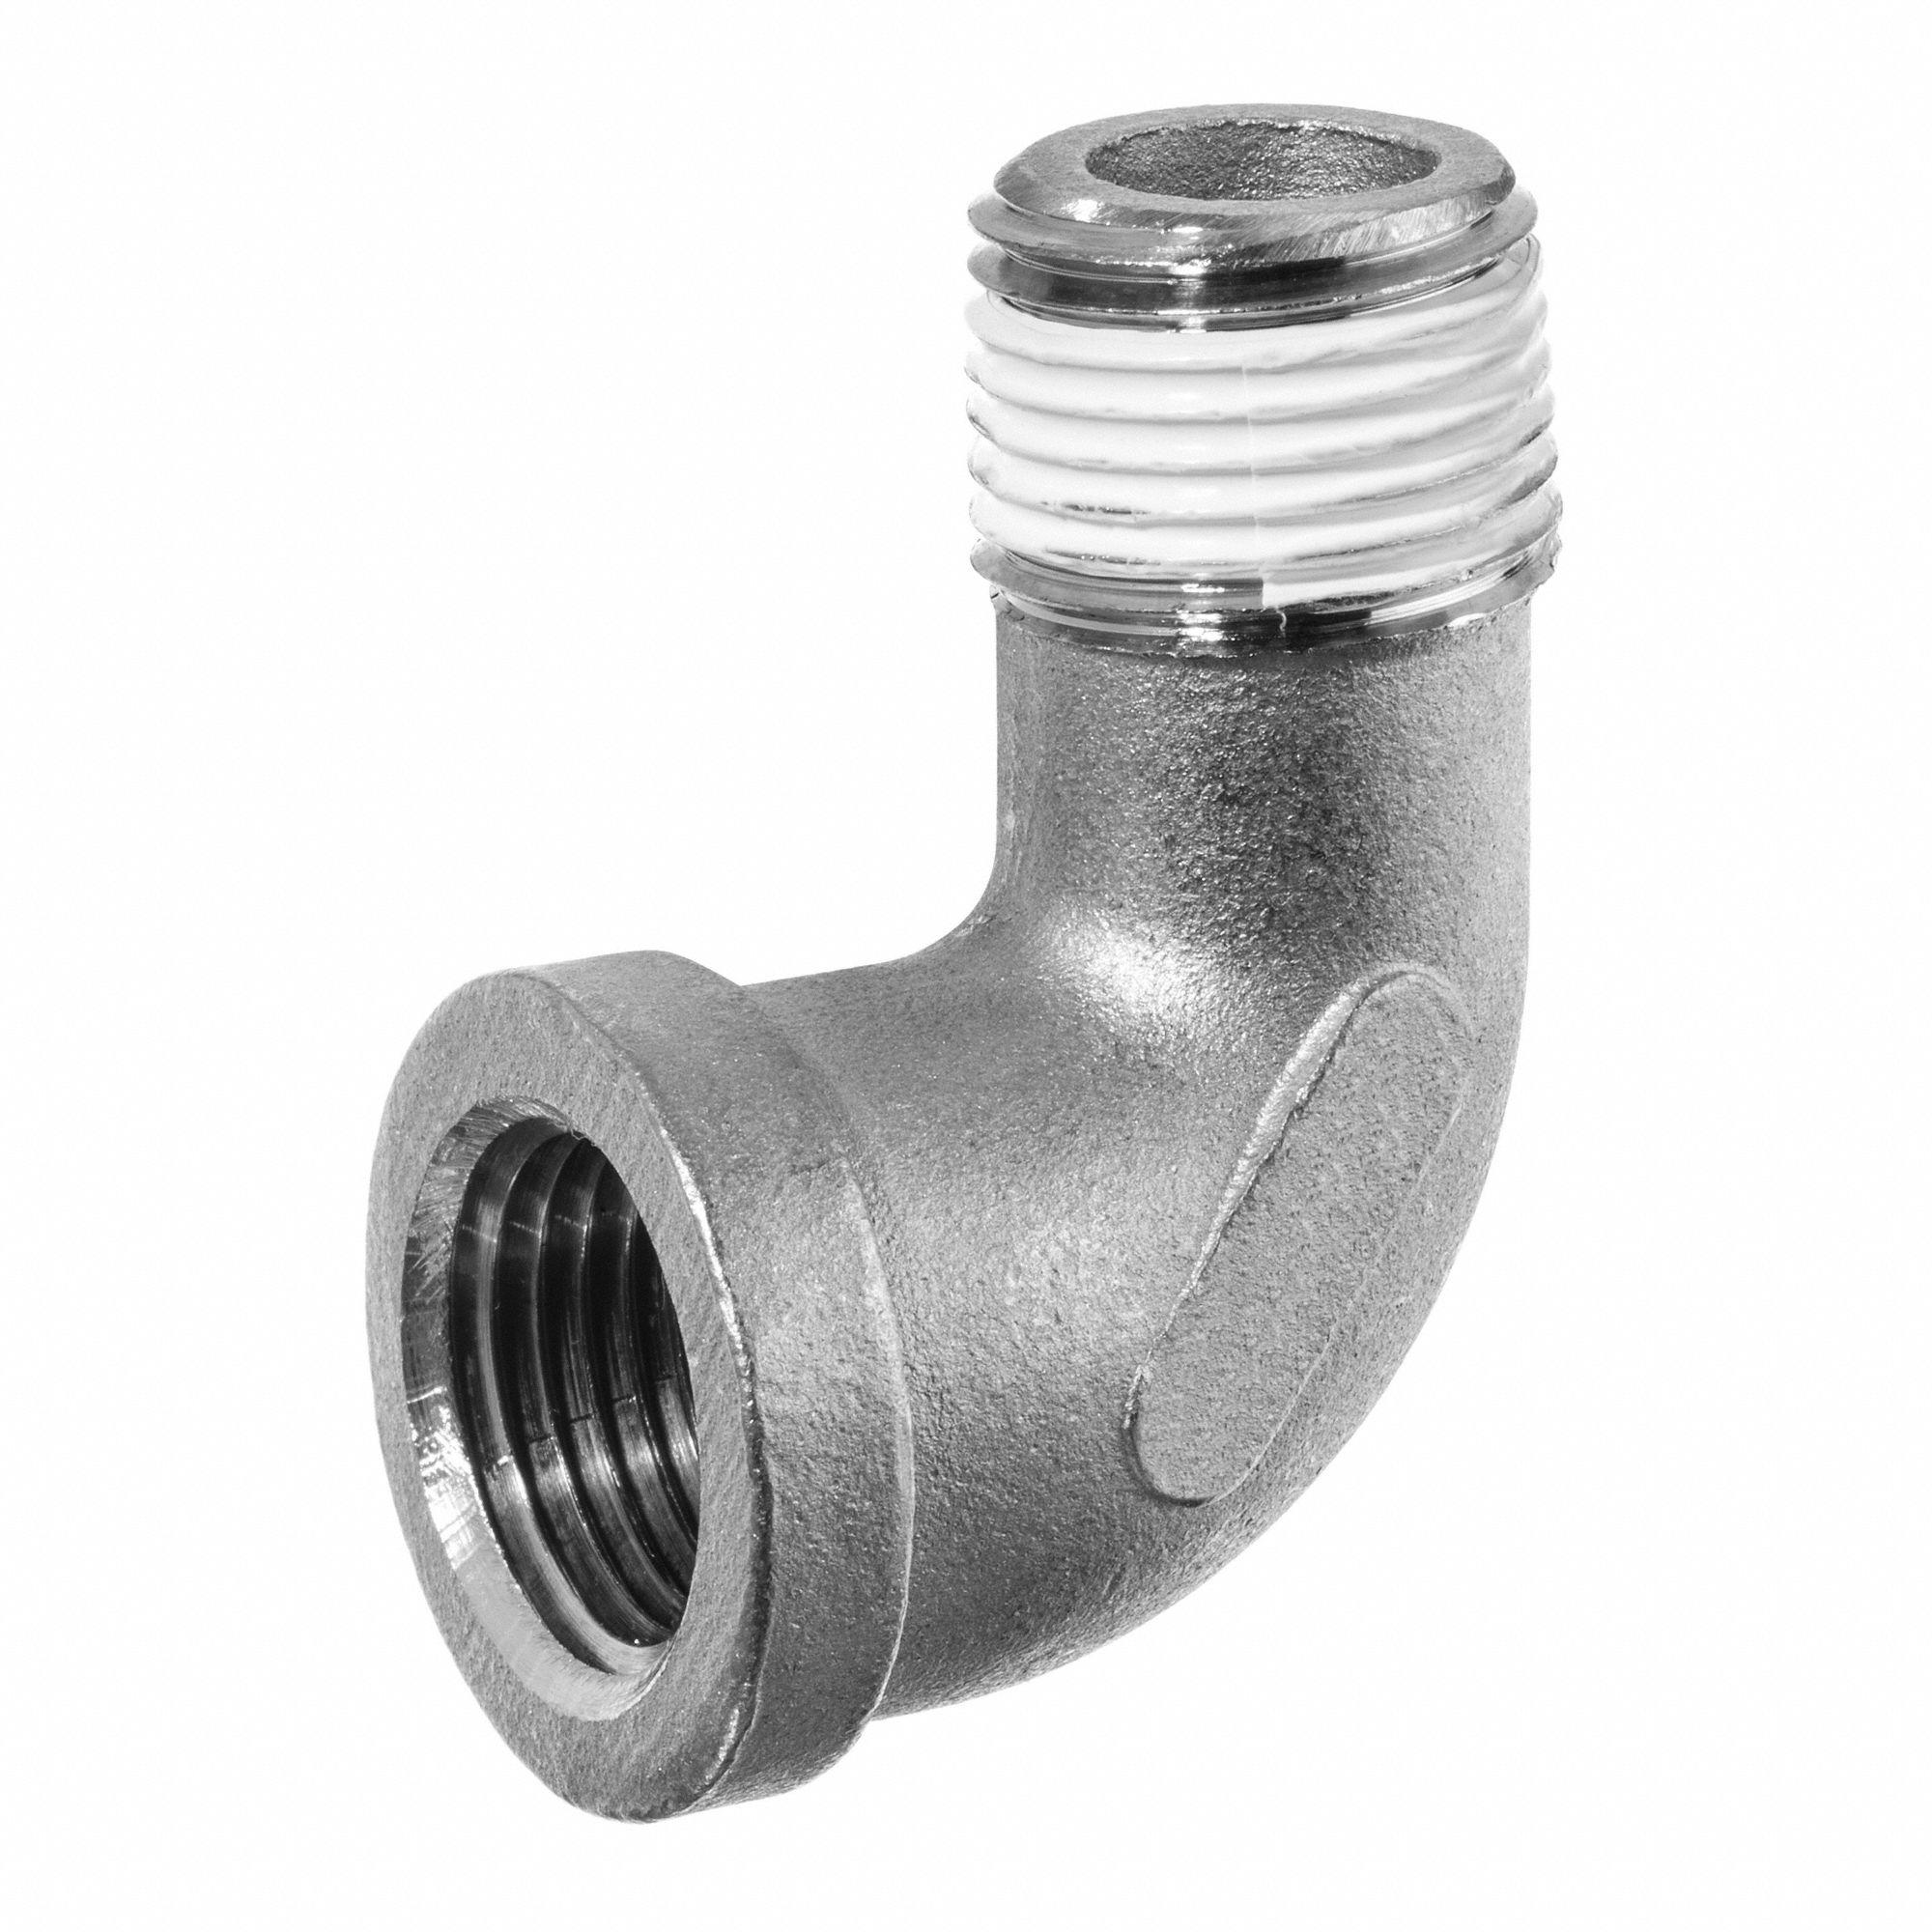 3/4" Elbow 90 Degree Angled Stainless Steel 304 Female Threaded Pipe Fitting NPT 